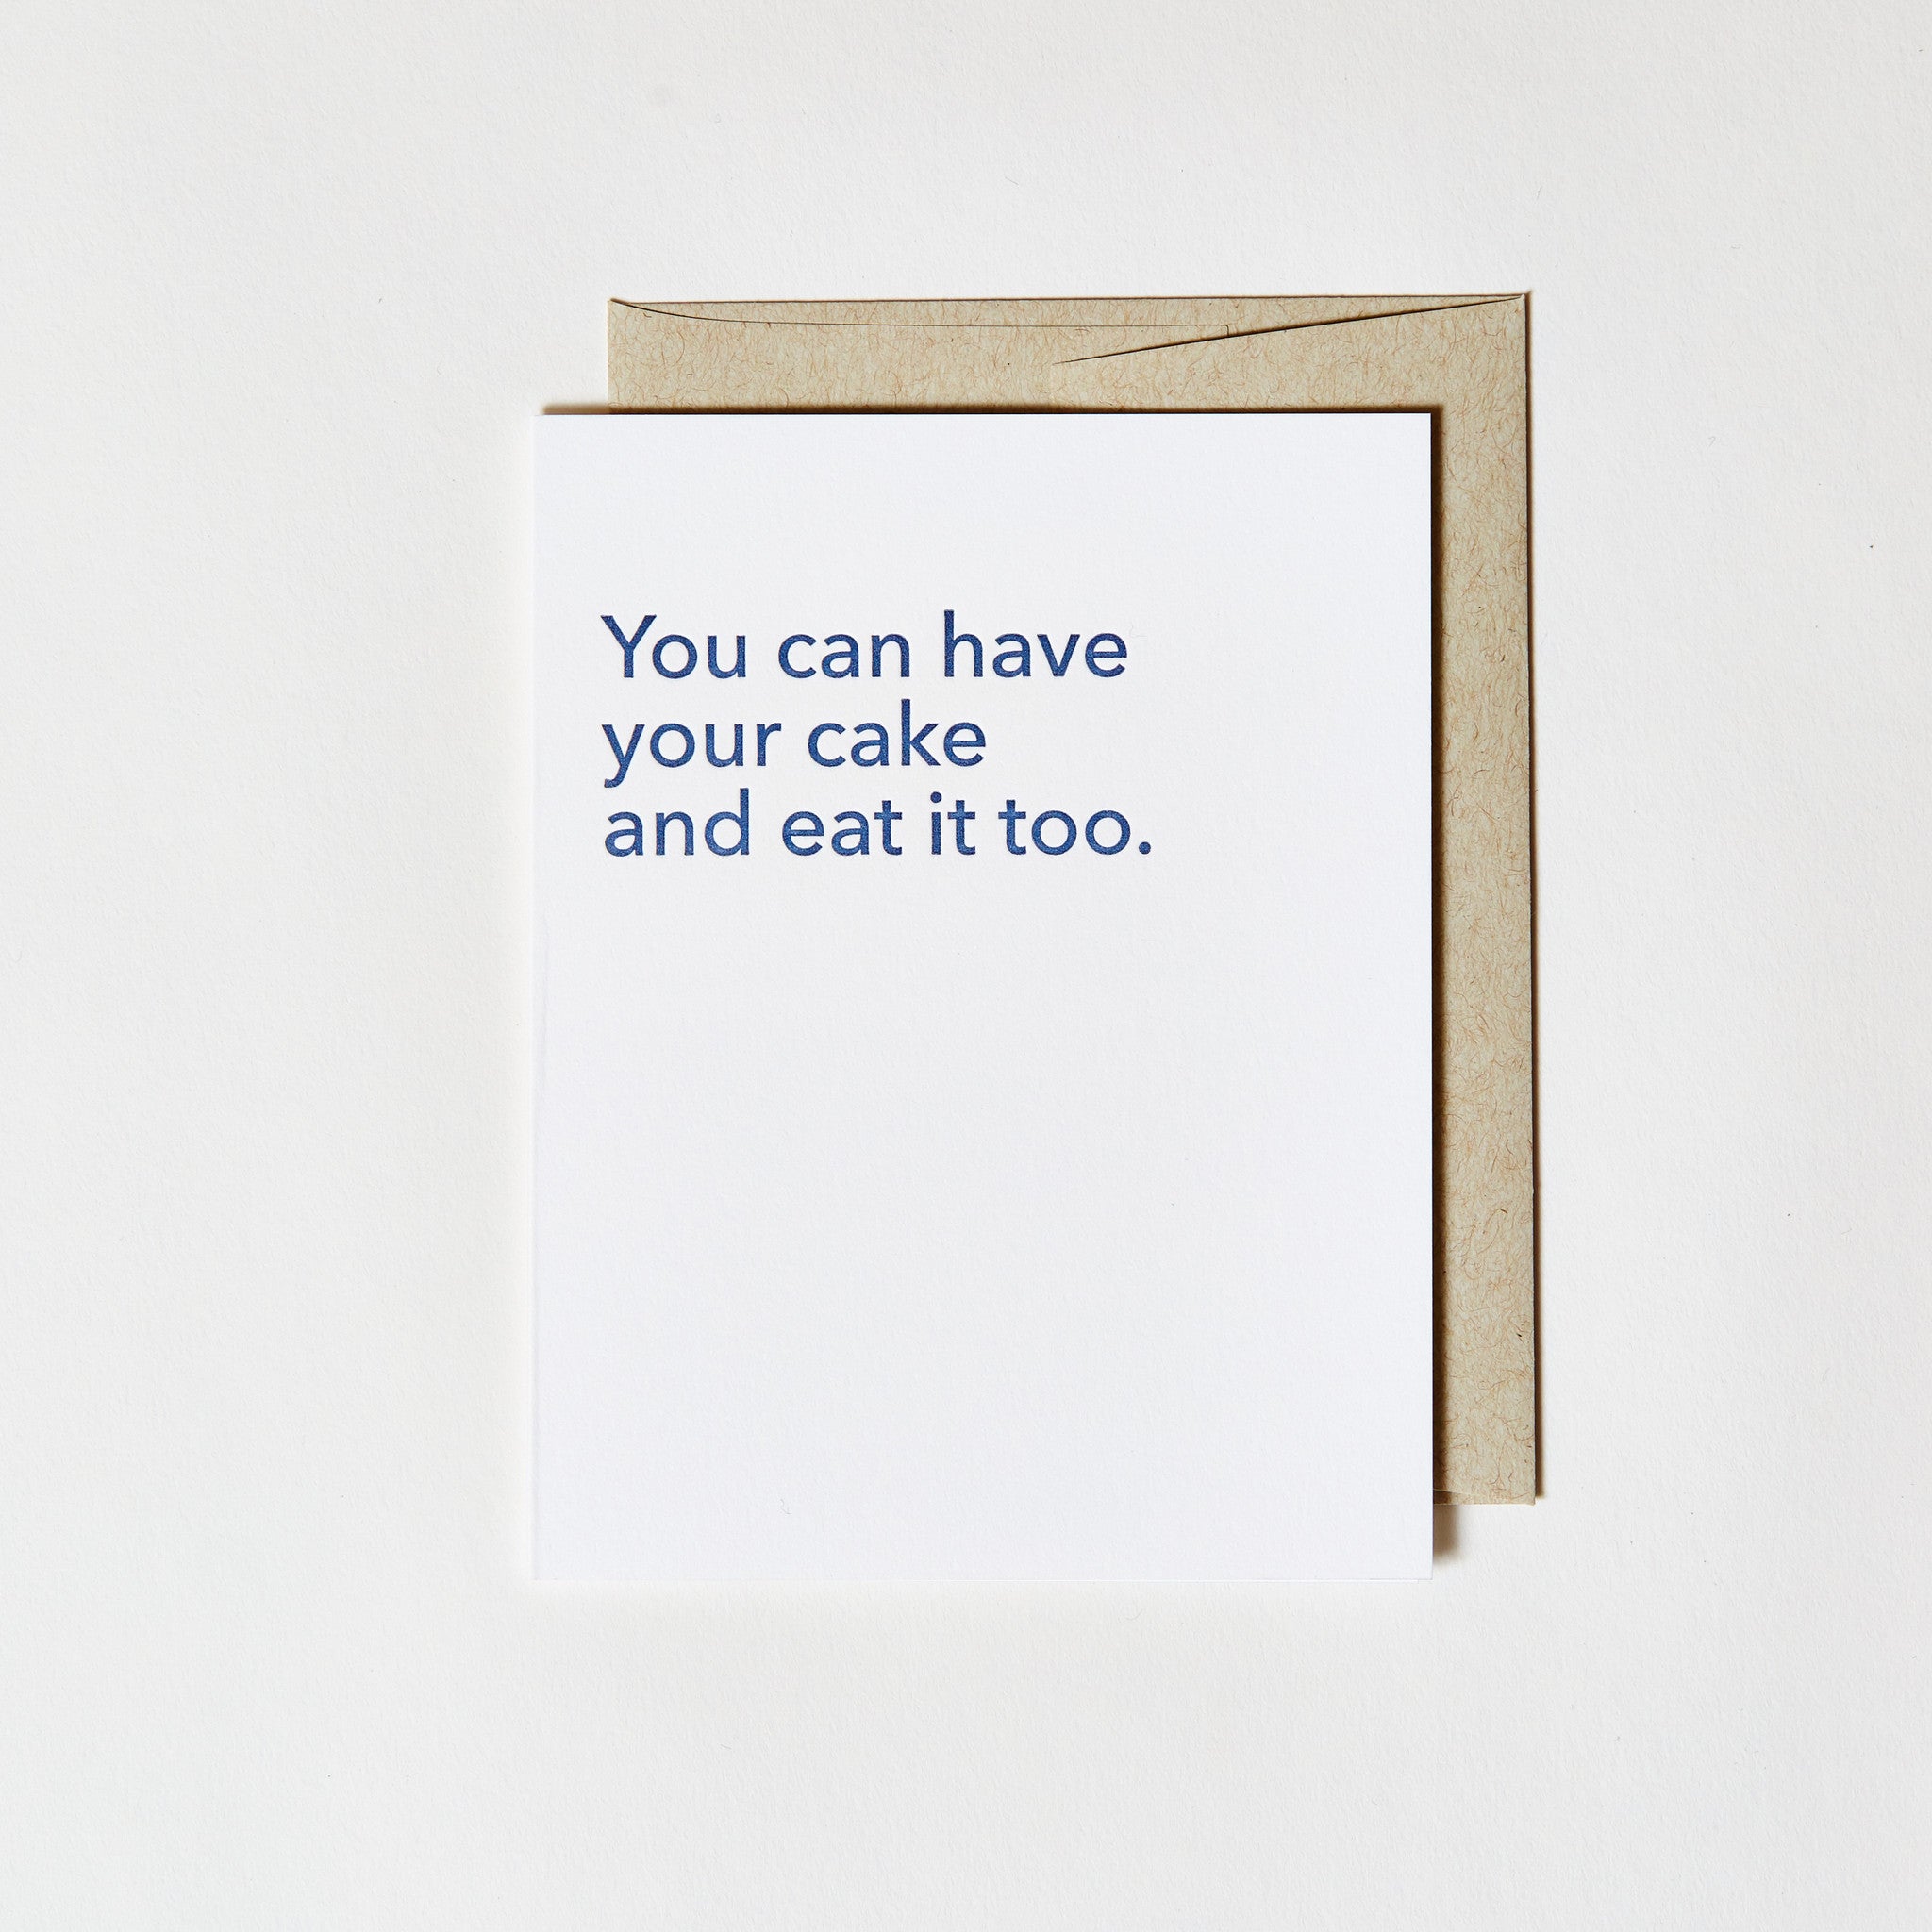 Letterpress Greeting Card - You can have your cake and eat it too.